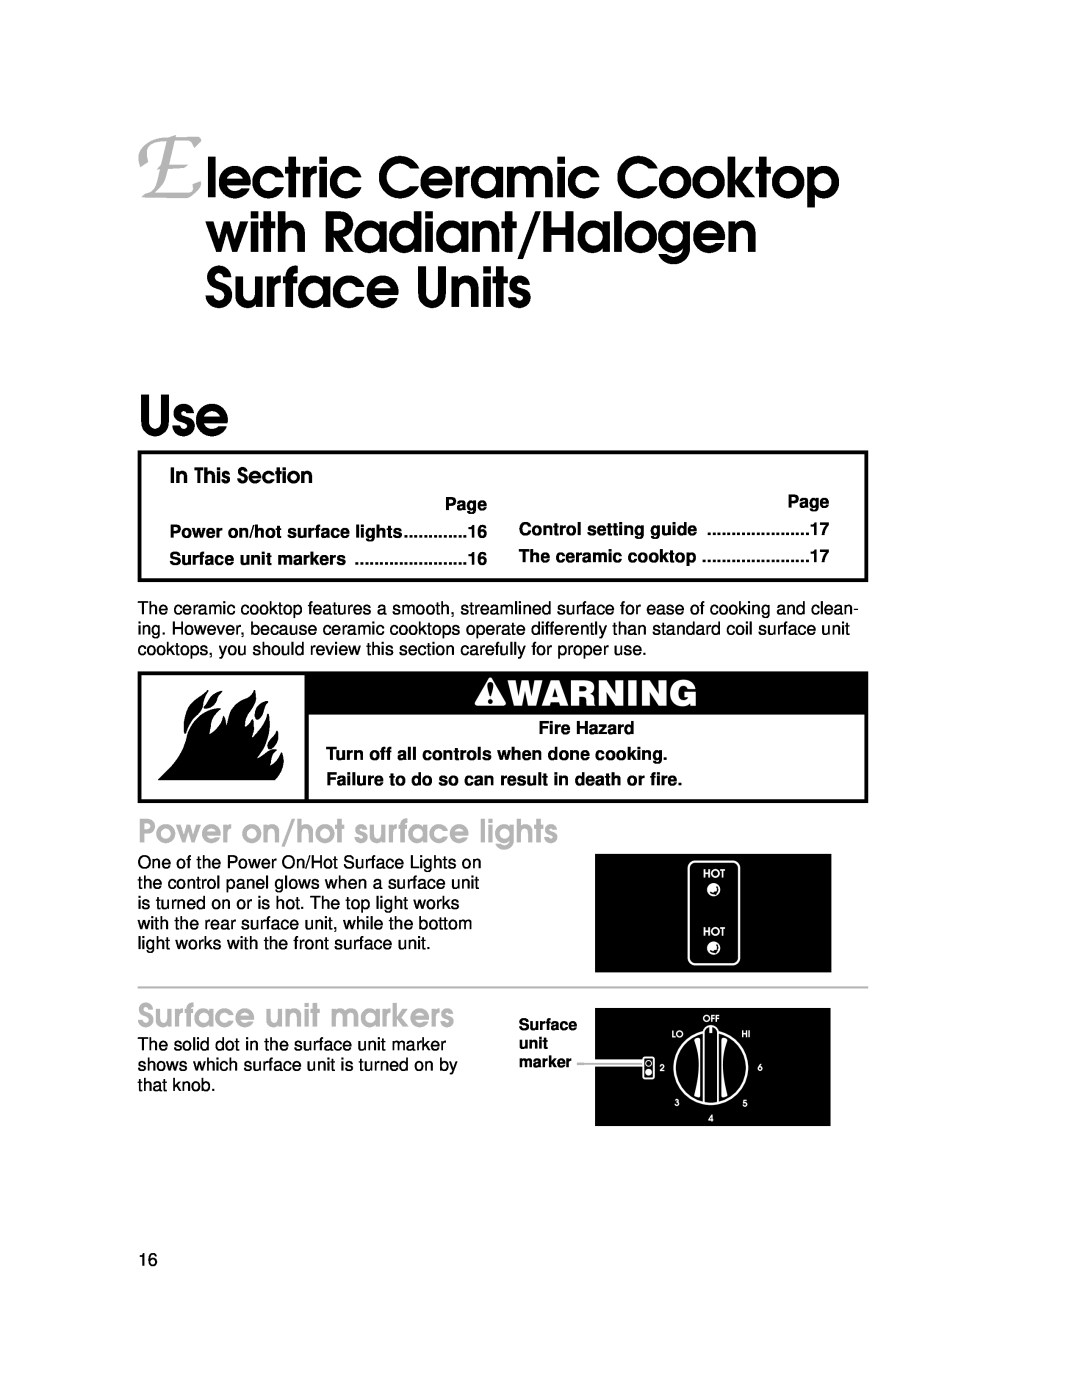 KitchenAid KKECT025 Electric Ceramic Cooktop with Radiant/Halogen Surface Units Use, Power on/hot surface lights, wWARNING 